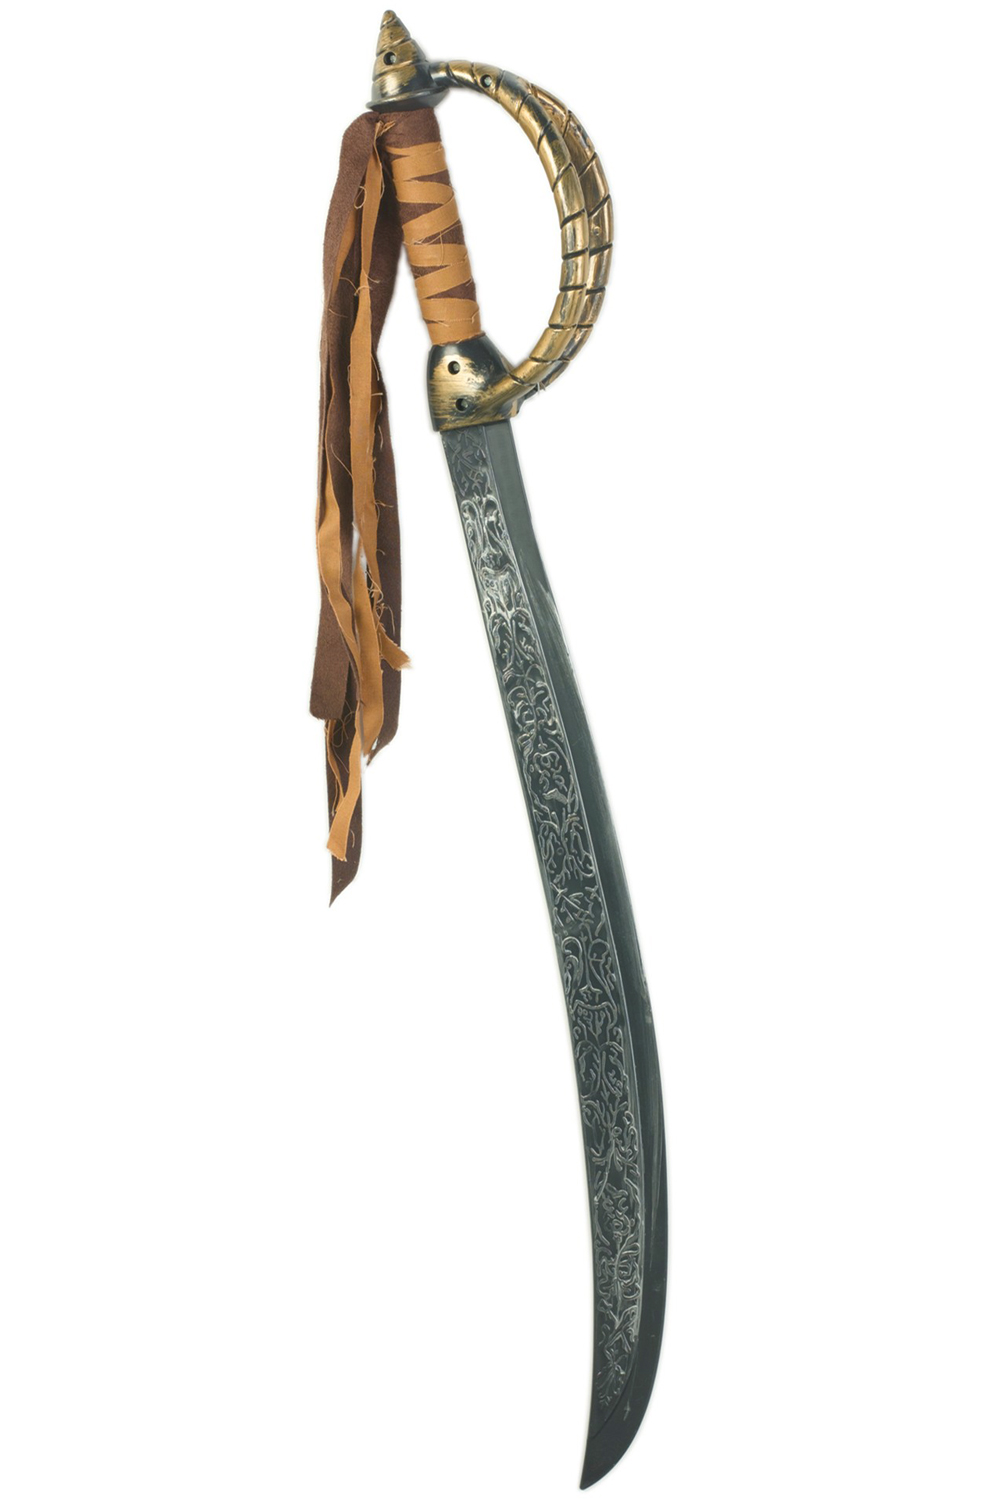 Check out the deal on Caribbean Pirate Sword at PureCostumes.com.